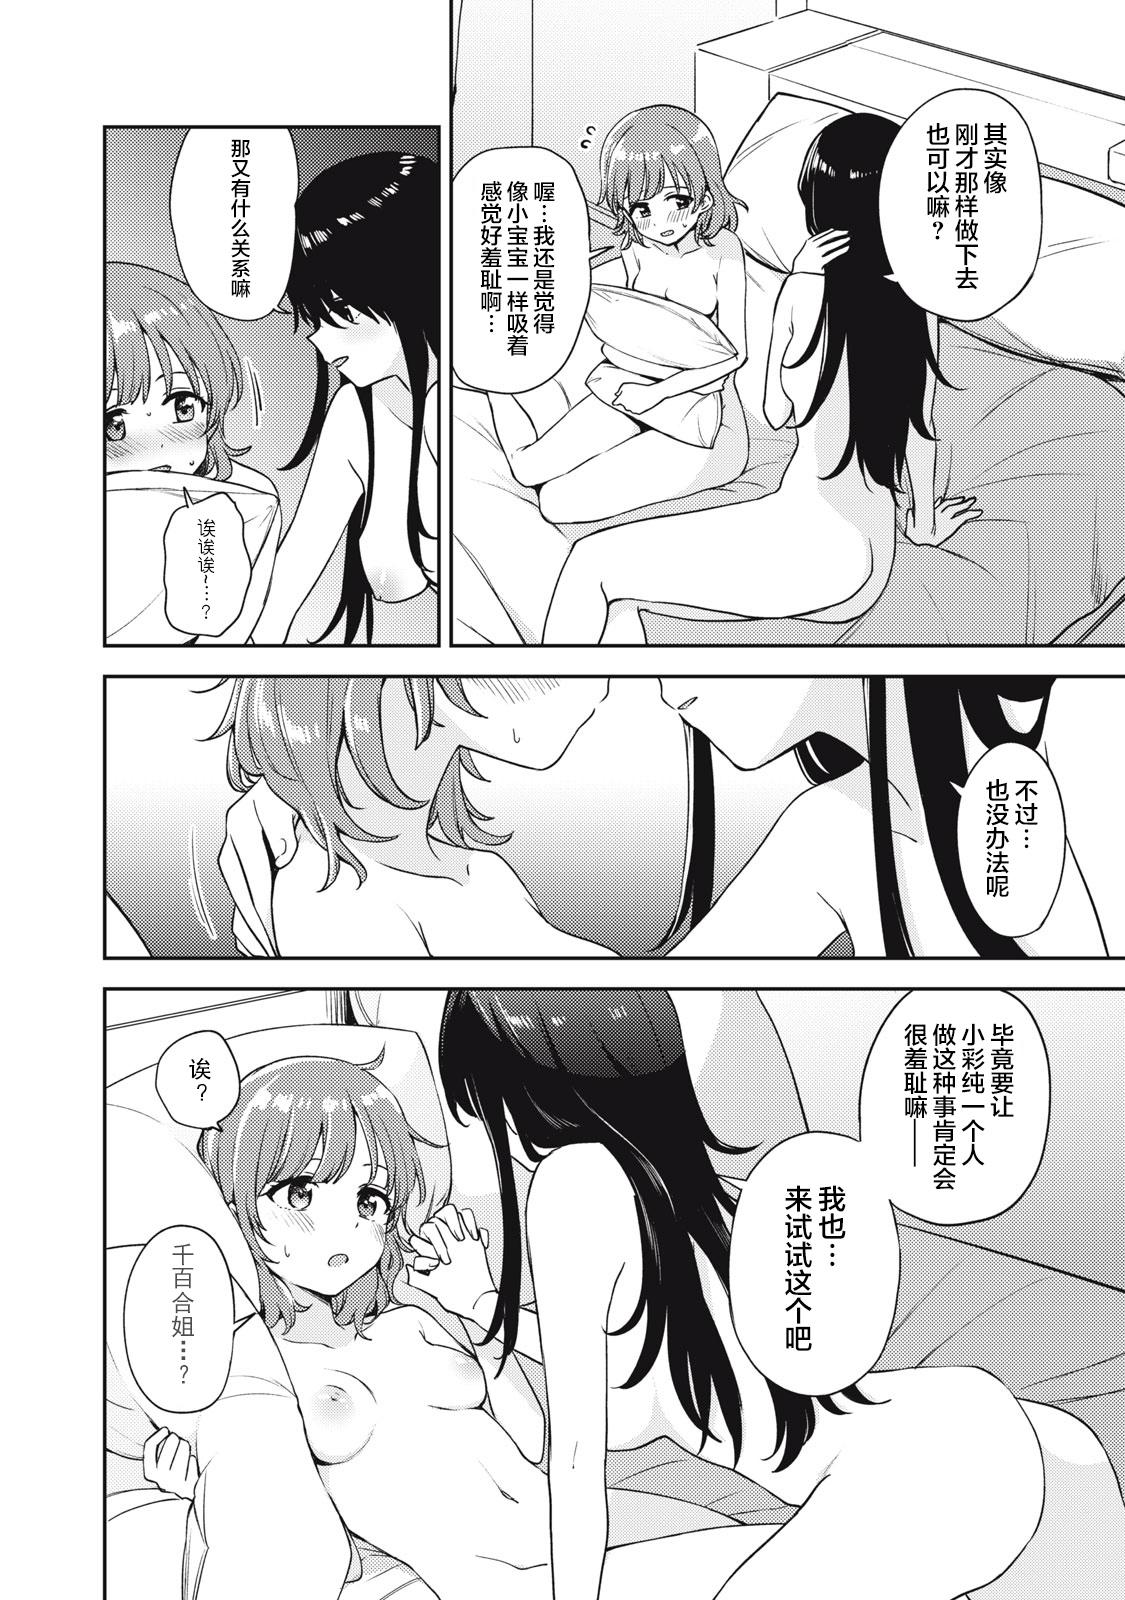 Celebrity Sex Asumi-chan Is Interested In Lesbian Brothels! Extra Episode Dicksucking - Page 8